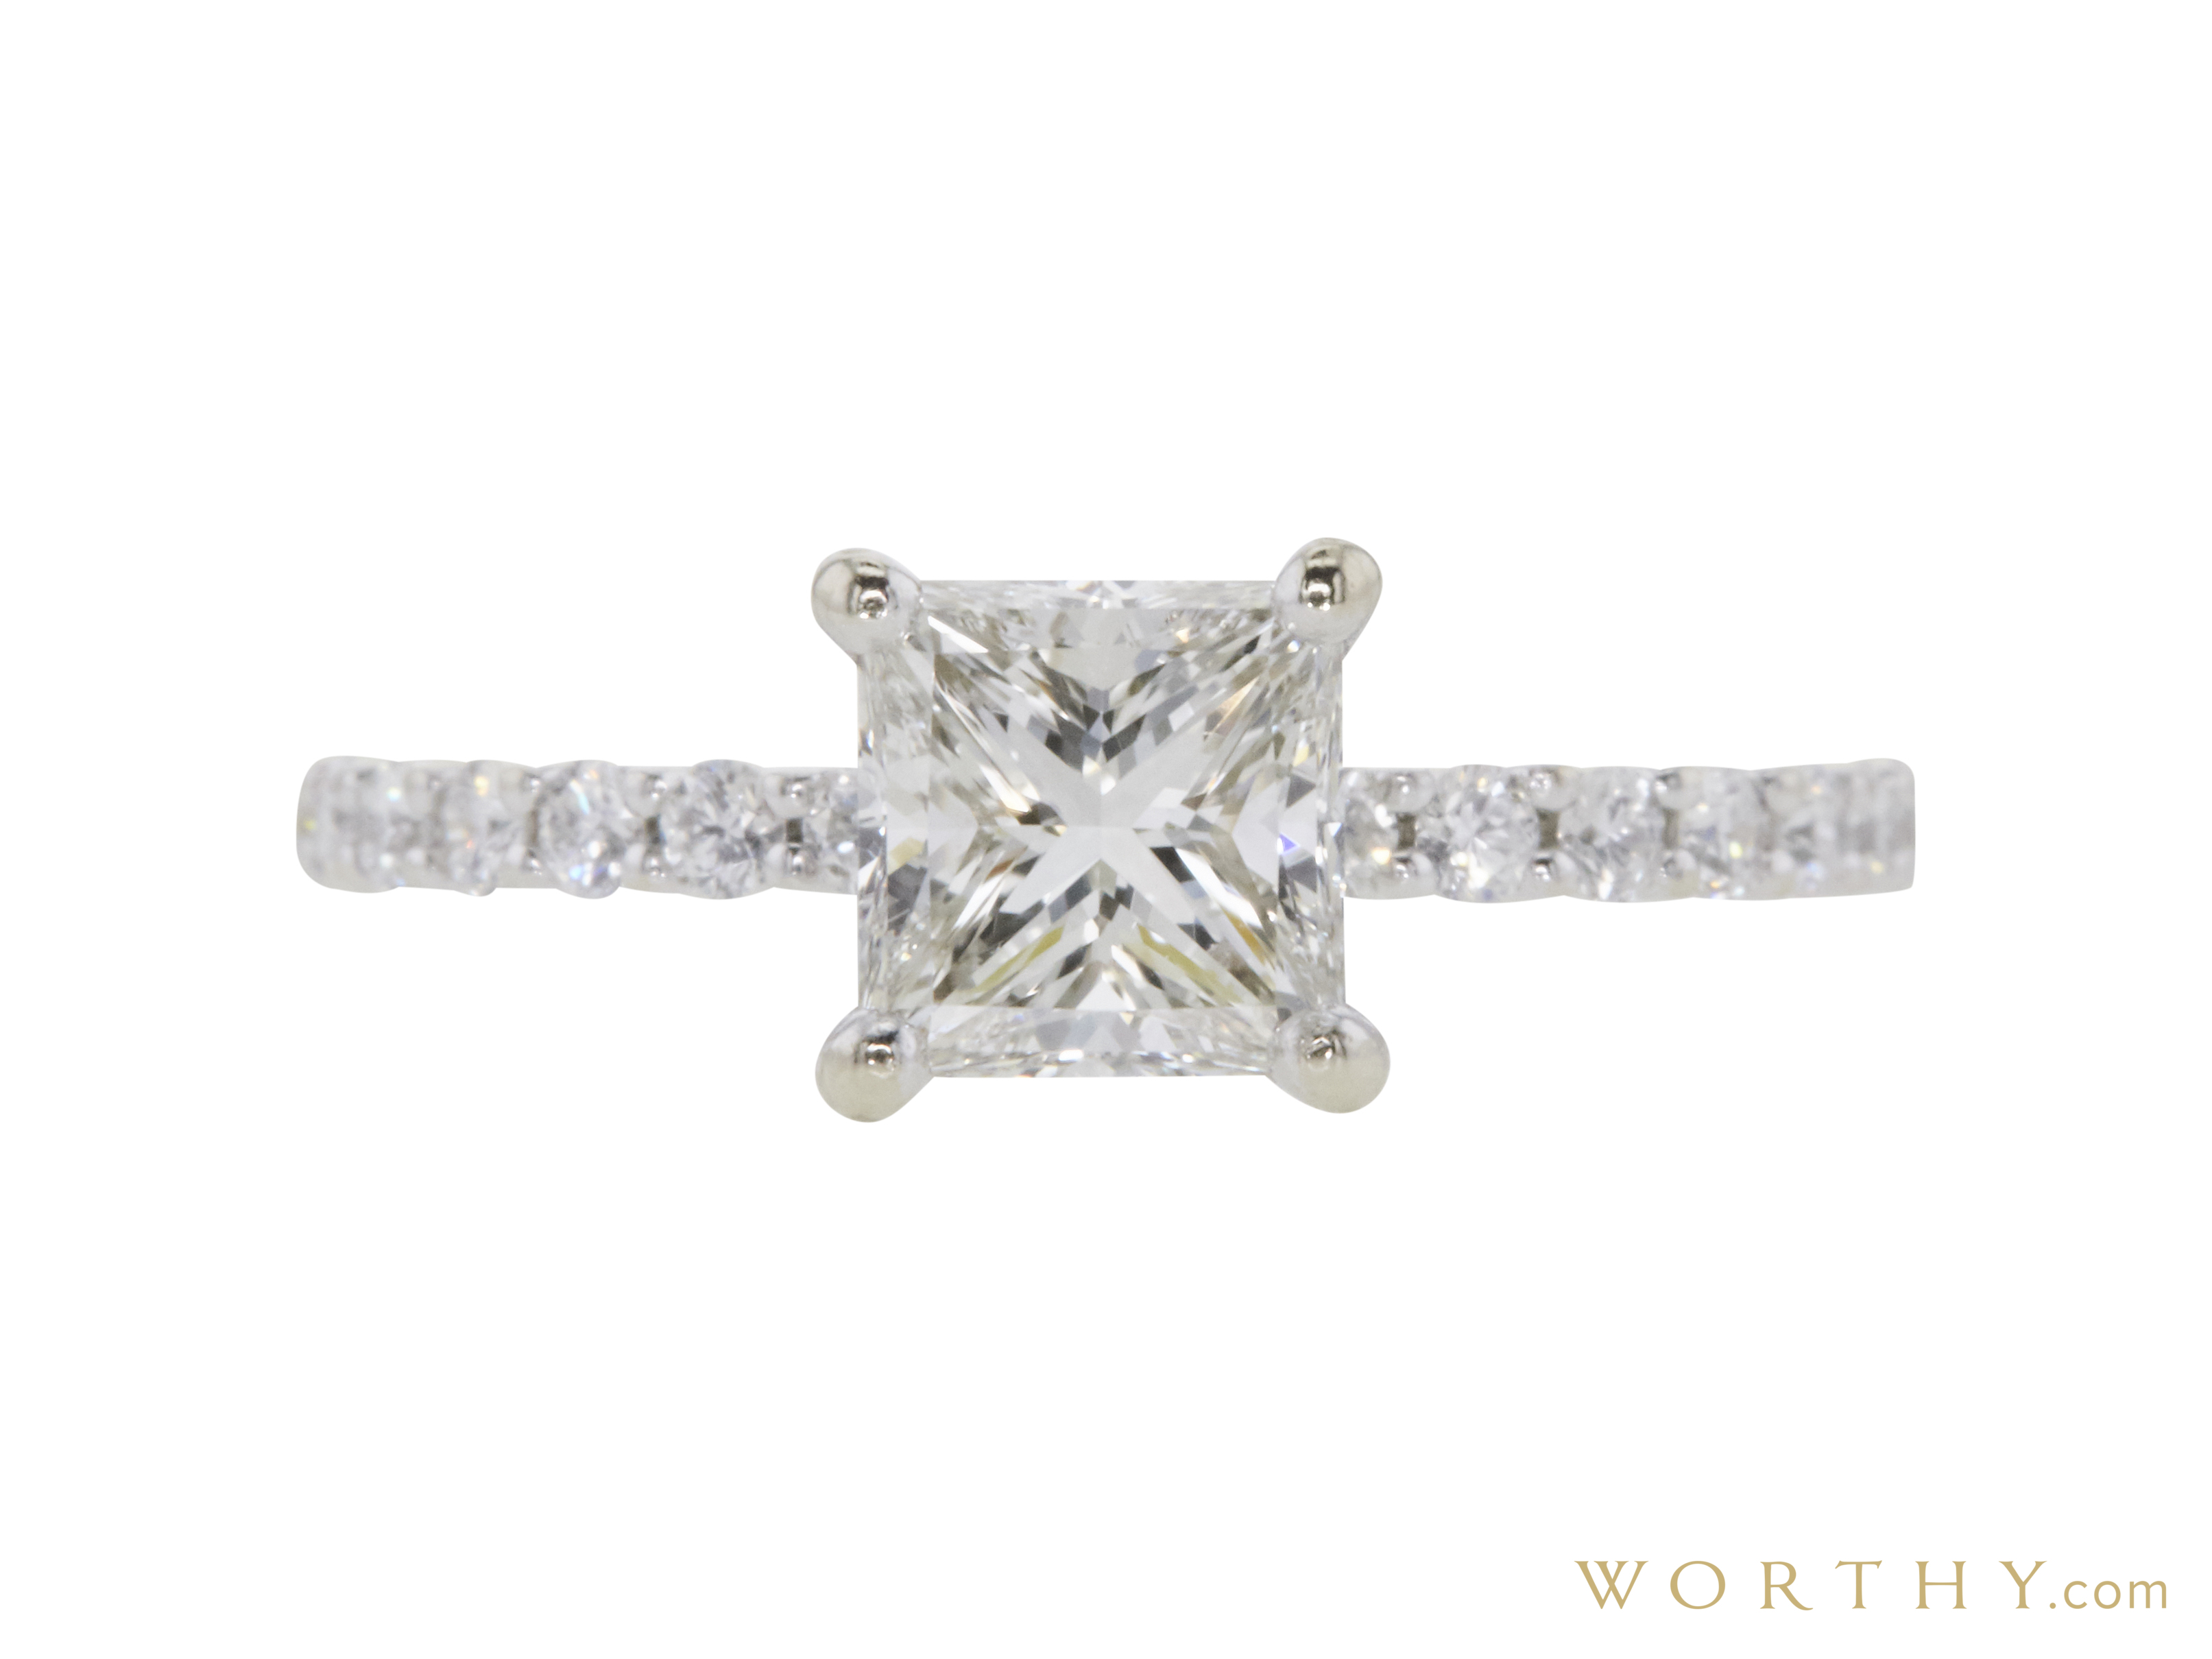 1.20 ct. Princess Cut Solitaire Ring | Sold For $3,006 | Worthy